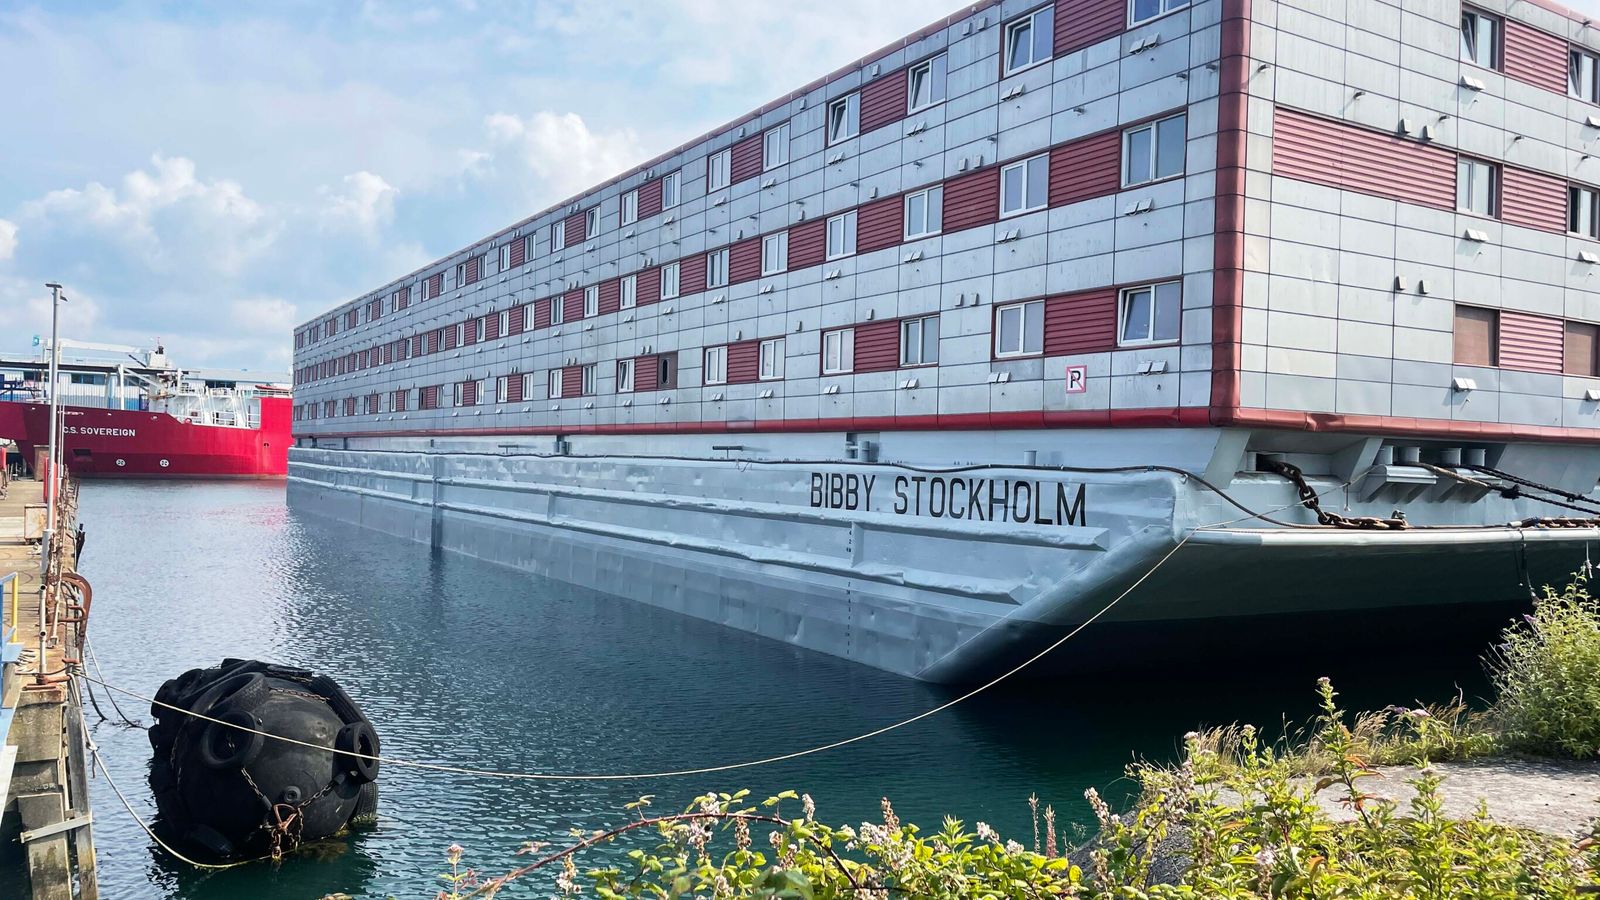 Fire safety concerns delay arrival of first asylum seekers on Bibby Stockholm barge